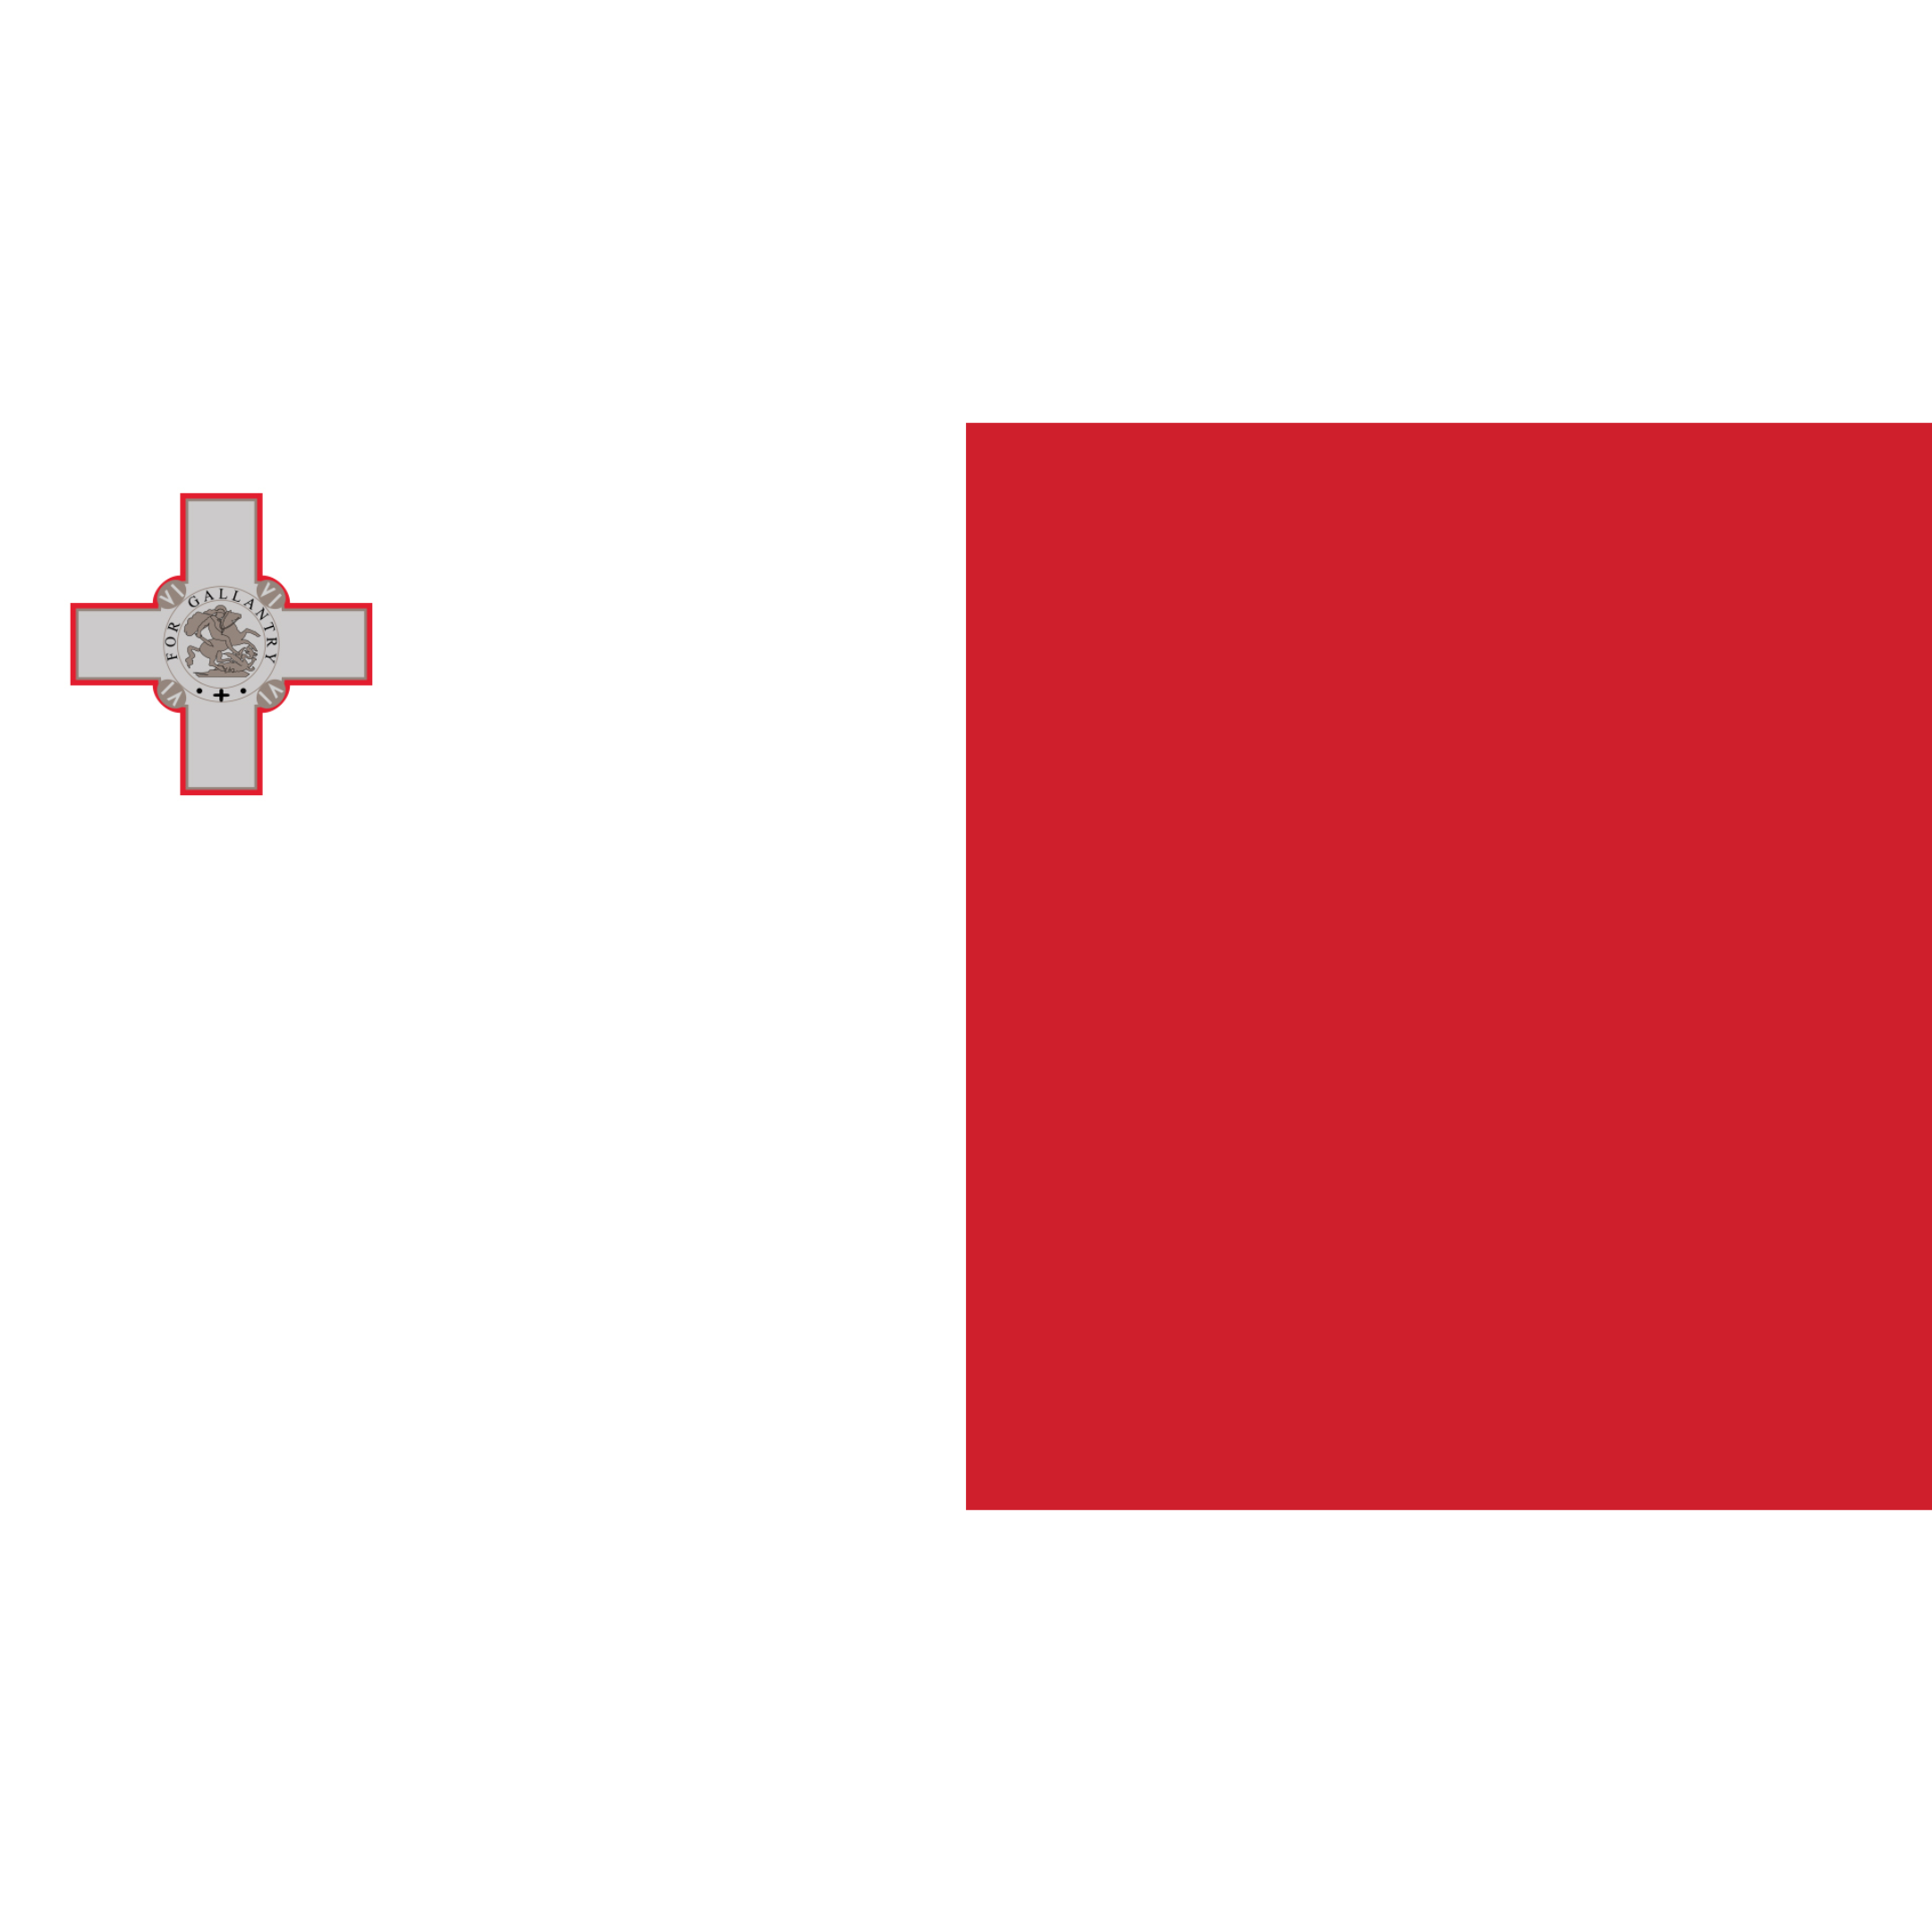 The flag of Malta has two equal white and red vertical halves with a George Cross in the upper left corner.